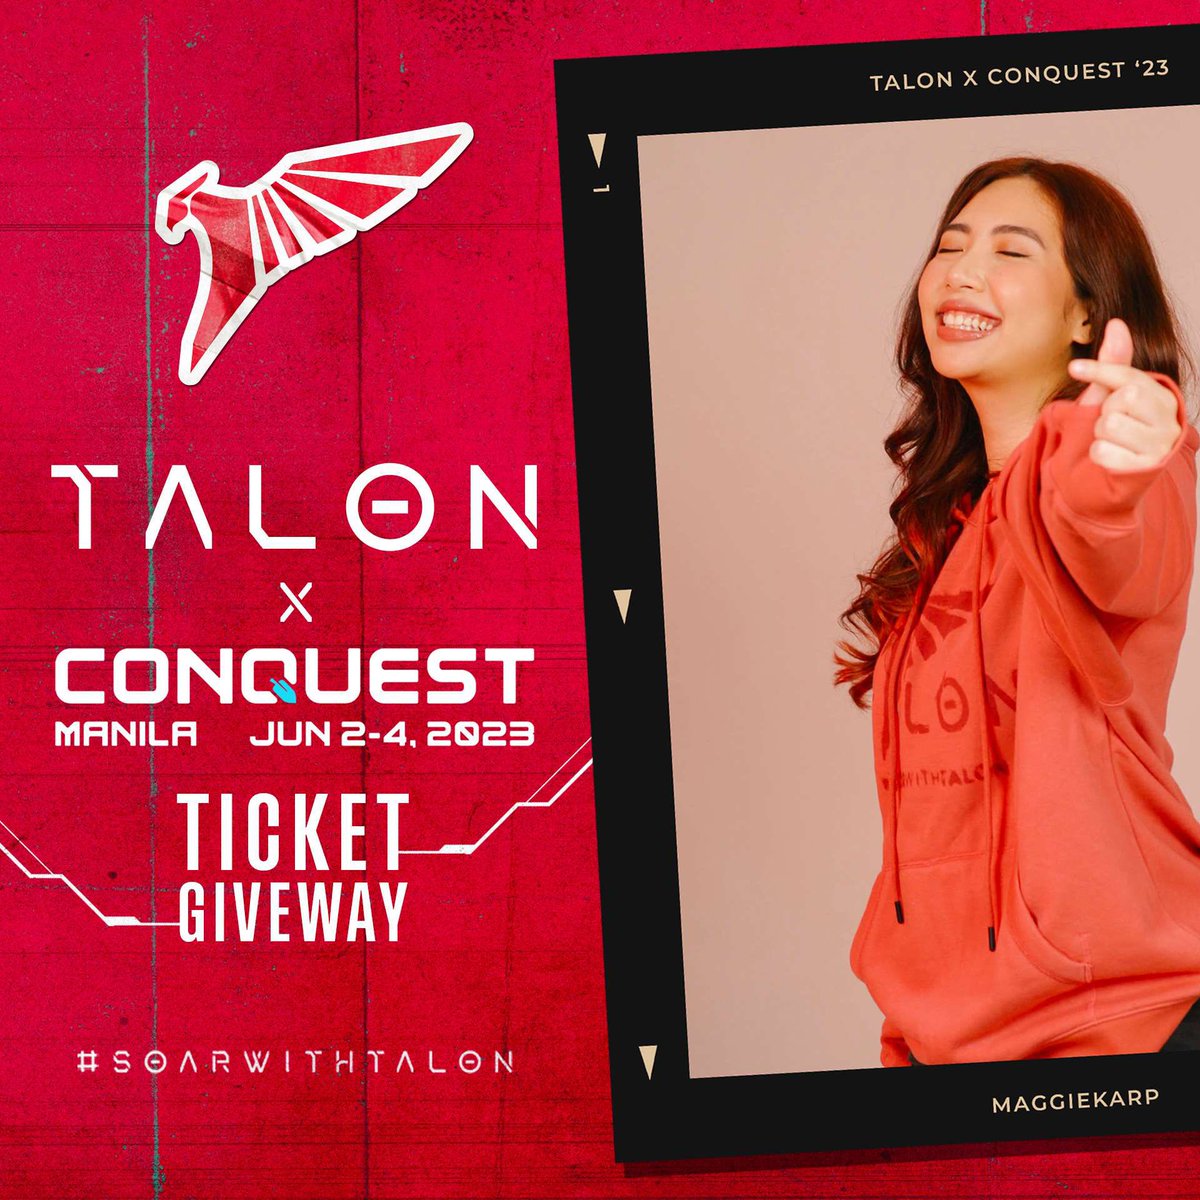 no tickets for conquest yet? @TALON_ESPORTS got you!

☑️ Follow @CGaming_SEA, @PlayOmega and @magukarp
☑️ Like & Retweet this post
☑️ Tag a friend you want to go with

Winner will be drawn on tomorrow May 31, 2023 9:00PM (SGT) 

#SOARWITHTALON #SEApremacy #SeeYouInTheSkies